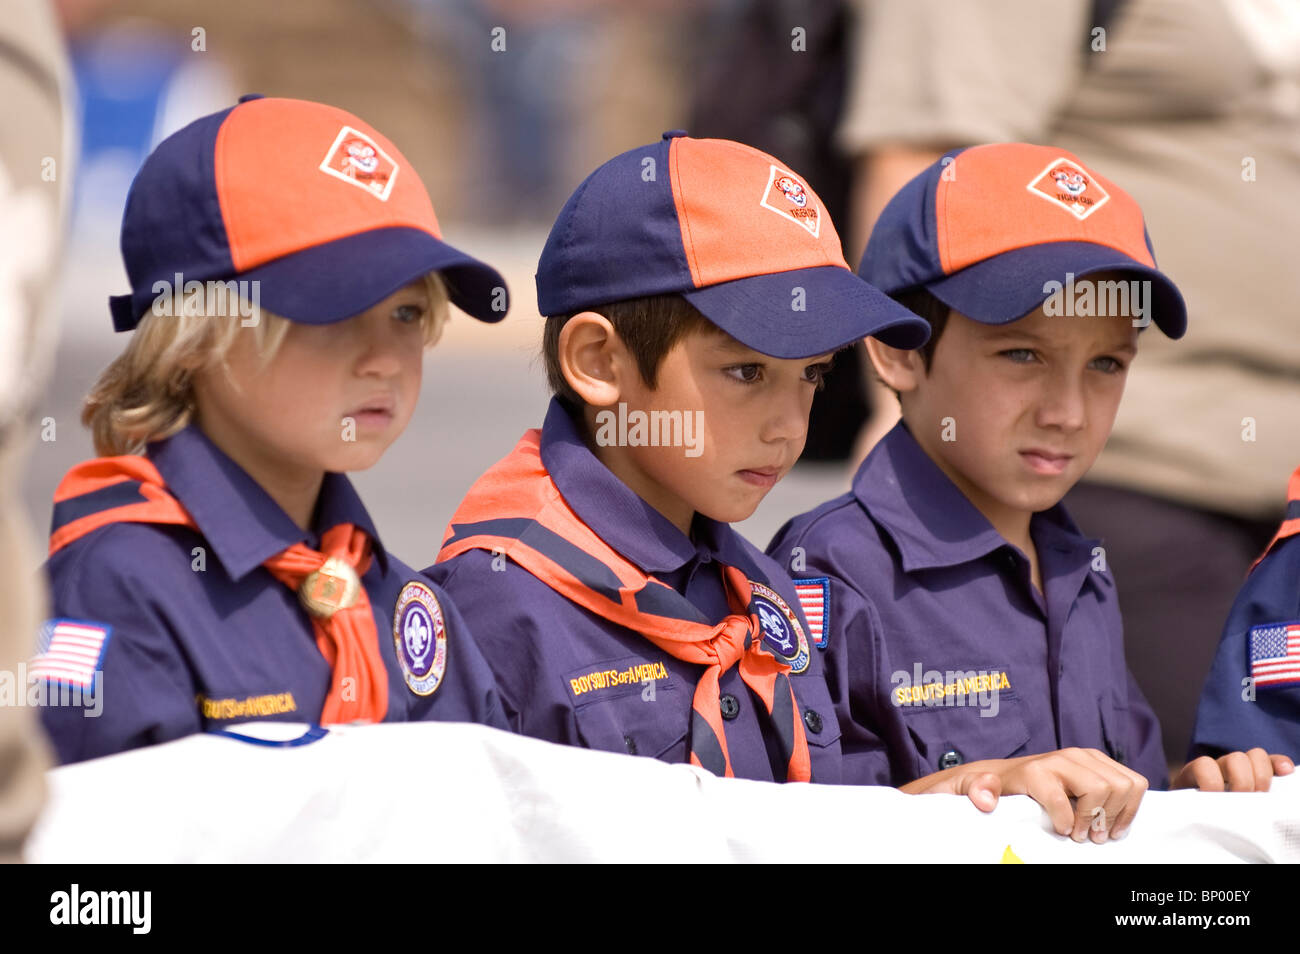 Three boy scouts holding up a banner at the La Habra Corn Festival parade Stock Photo